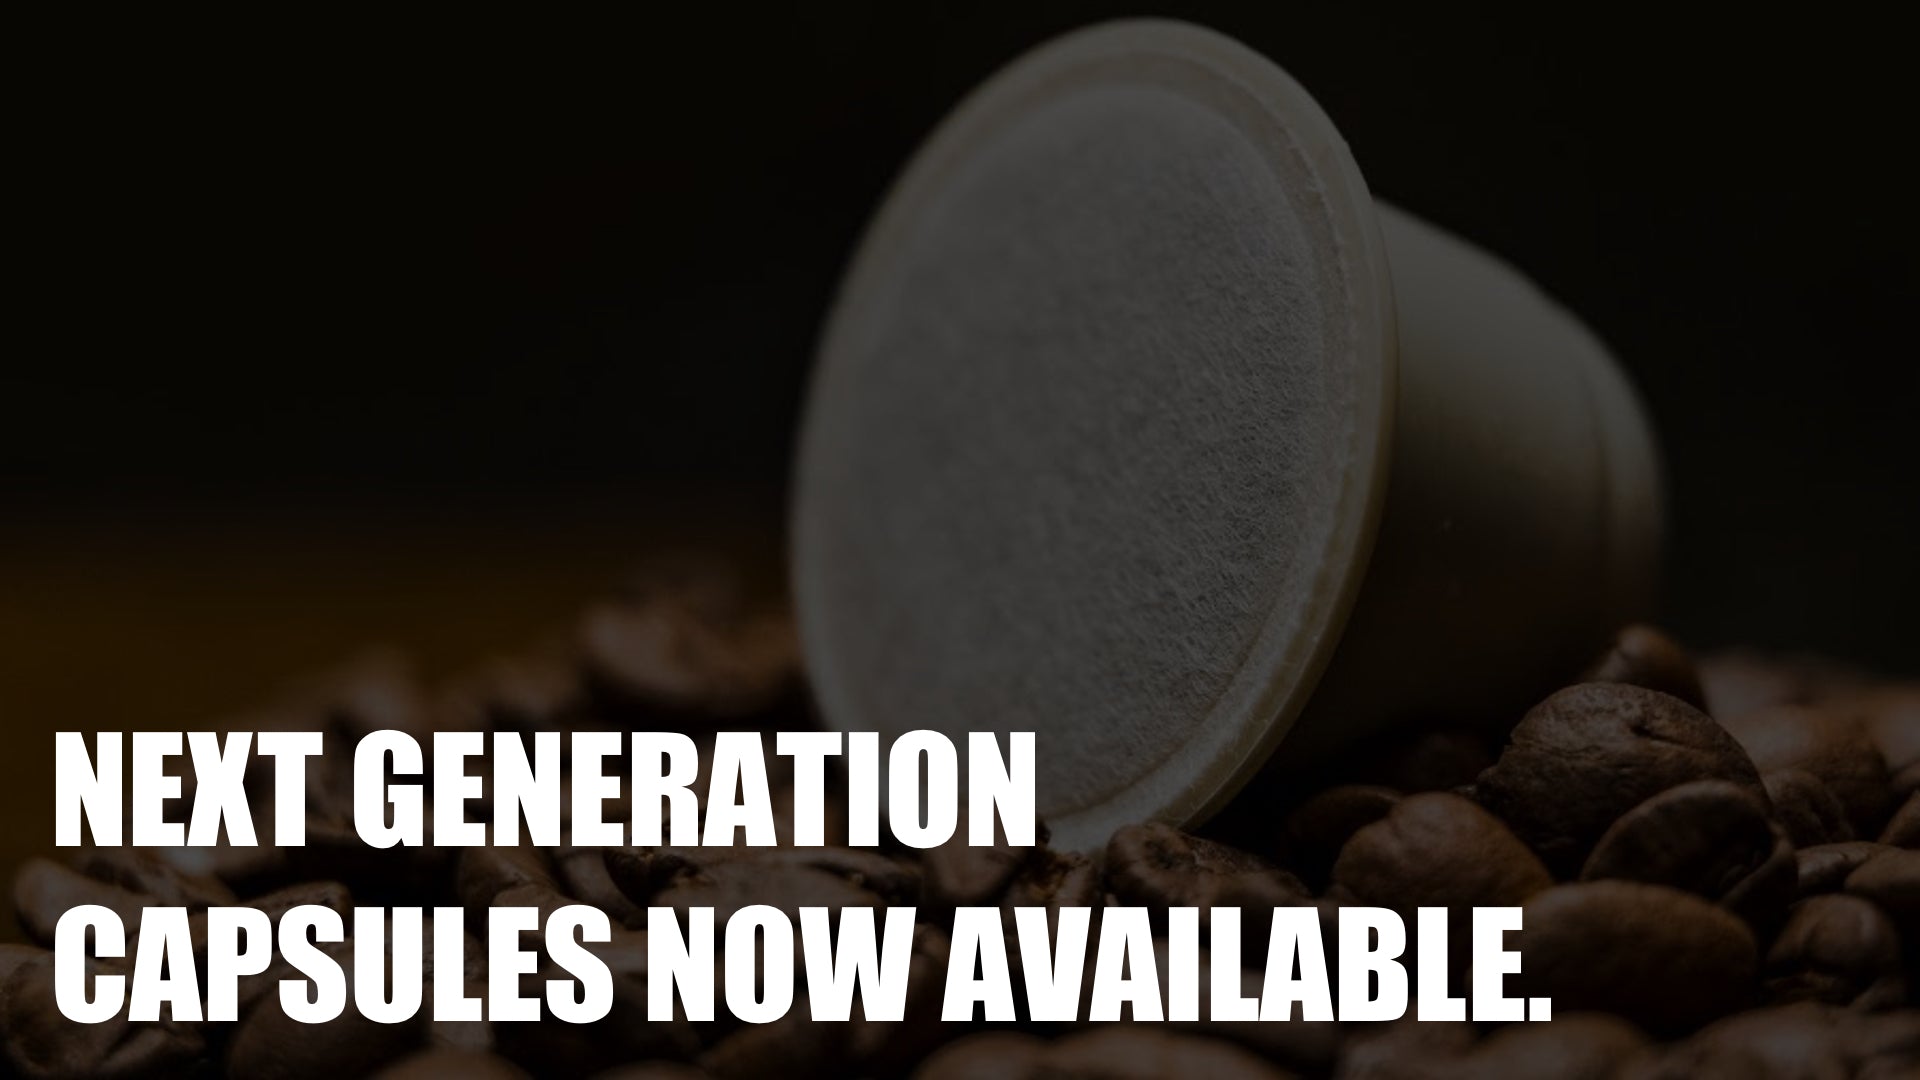 Next Gen Capsules Available Now